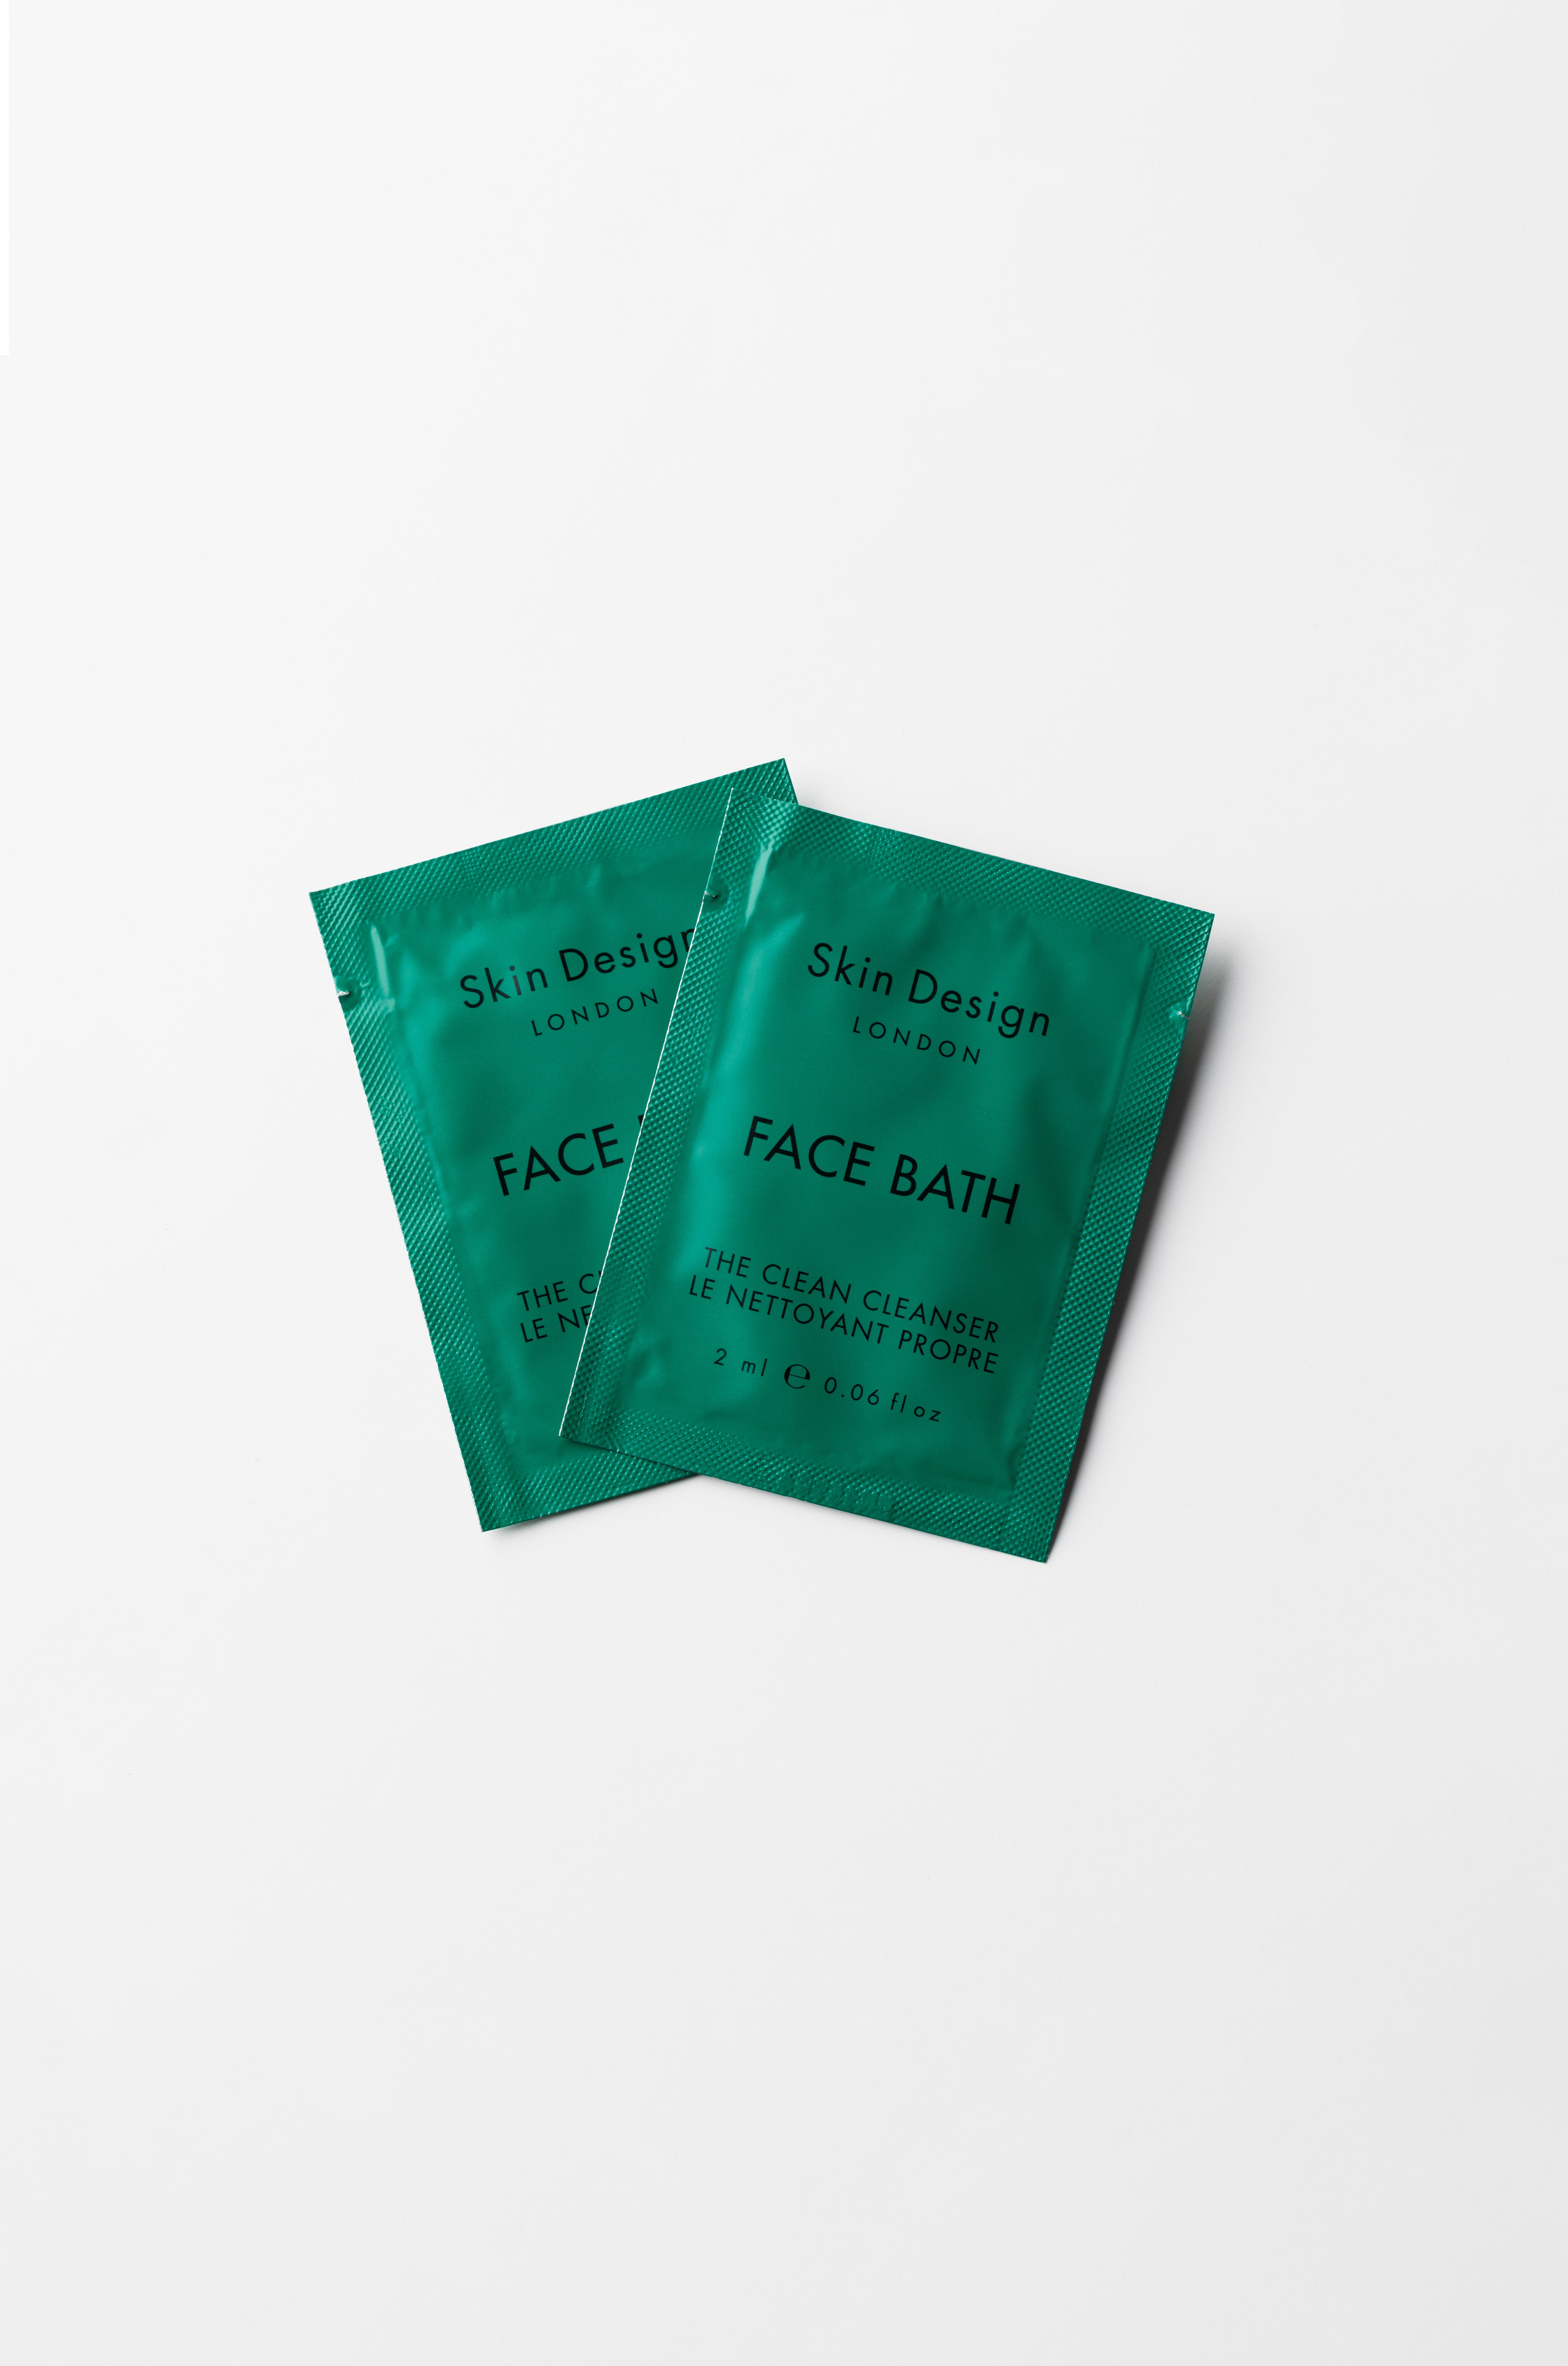 (NOT FOR SALE) The Face Bath Cleanser Sample x 2